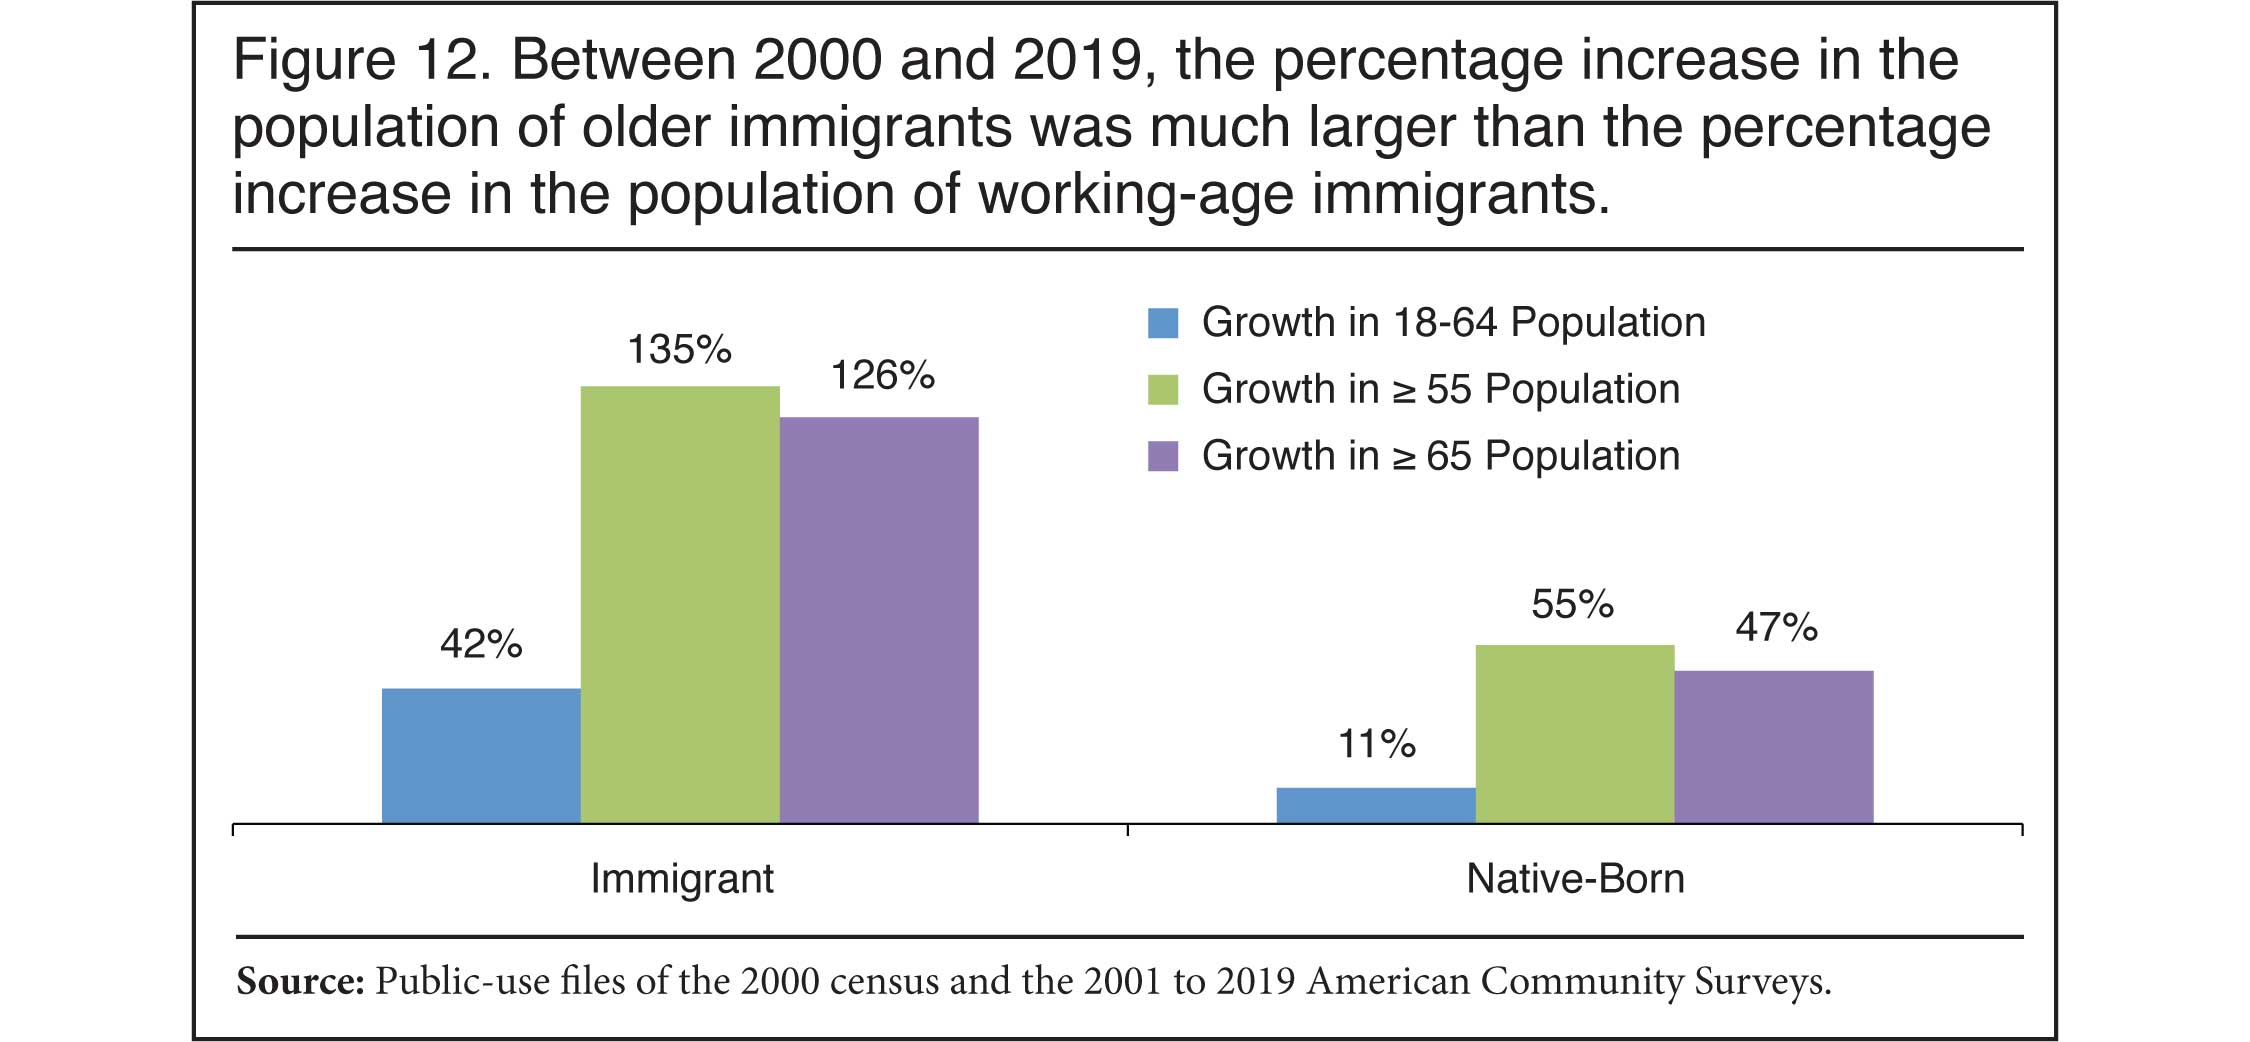 Graph: Between 2000 and 2019, the percentage increase in the population of older immigrants was much larger than the percentage increase in the population of working age immigrants